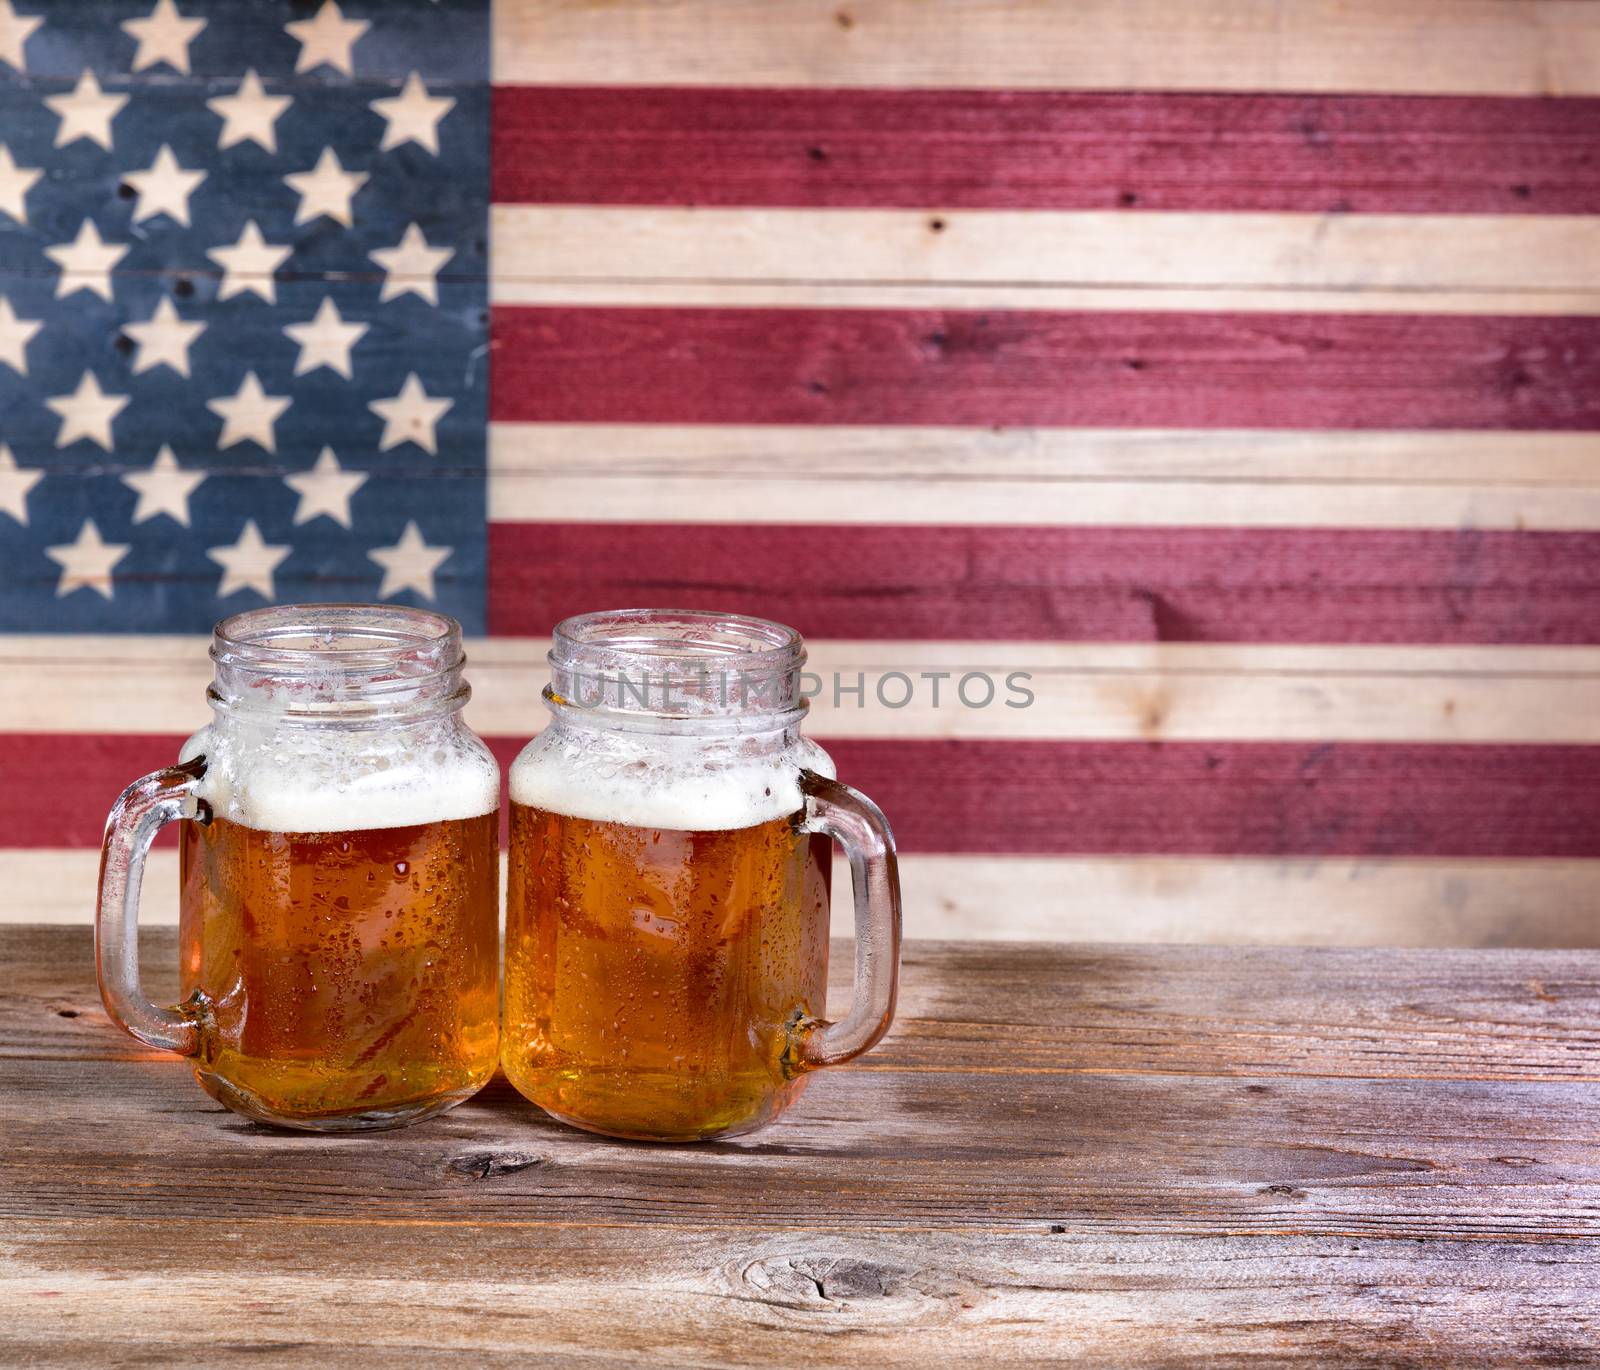 Two pint jars filled with beer with vintage wooden USA flag in background.